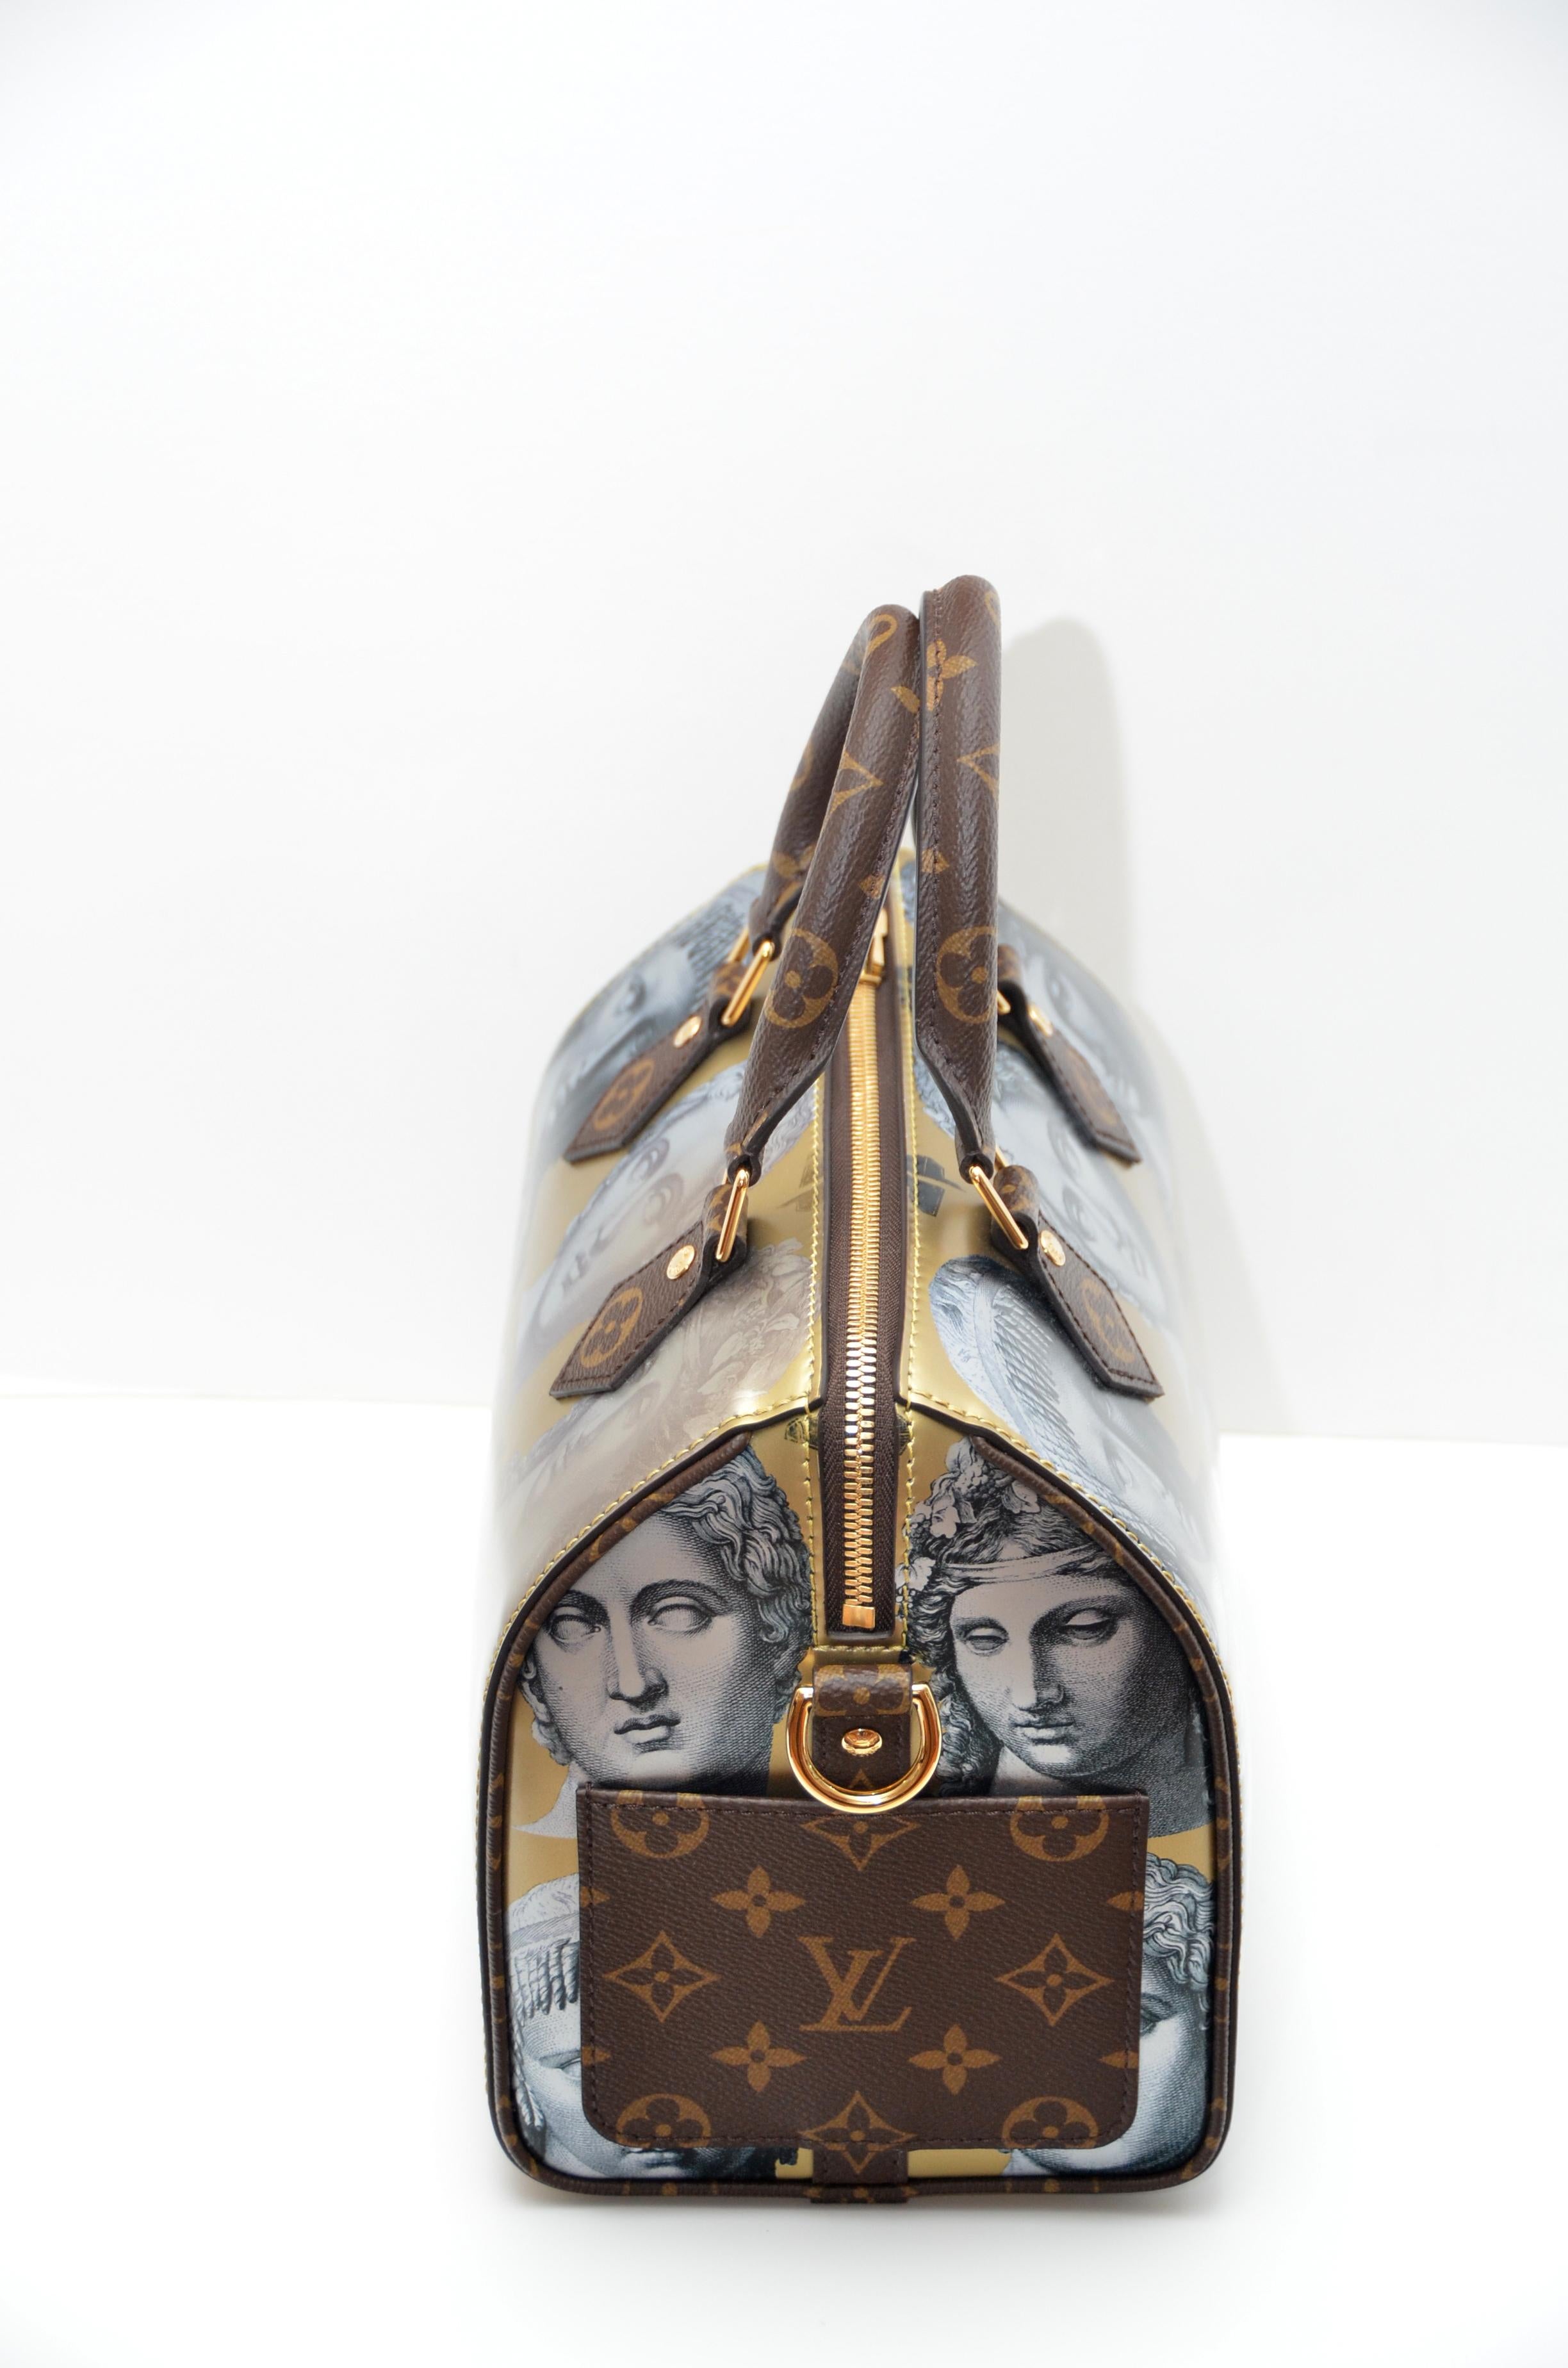 
Louis Vuitton Speedy 25 Fornasetti Gold Metallic Leather Bag 
100% guaranteed Authentic LV 
New with tags 
Bag dimensions are 9.8 bottom length  x 7.5 x 5.9 inches 
Comes With:
LV Box, LV Purchase Receipt, LV Protection Bag,LV Locker
LV Bandouliere